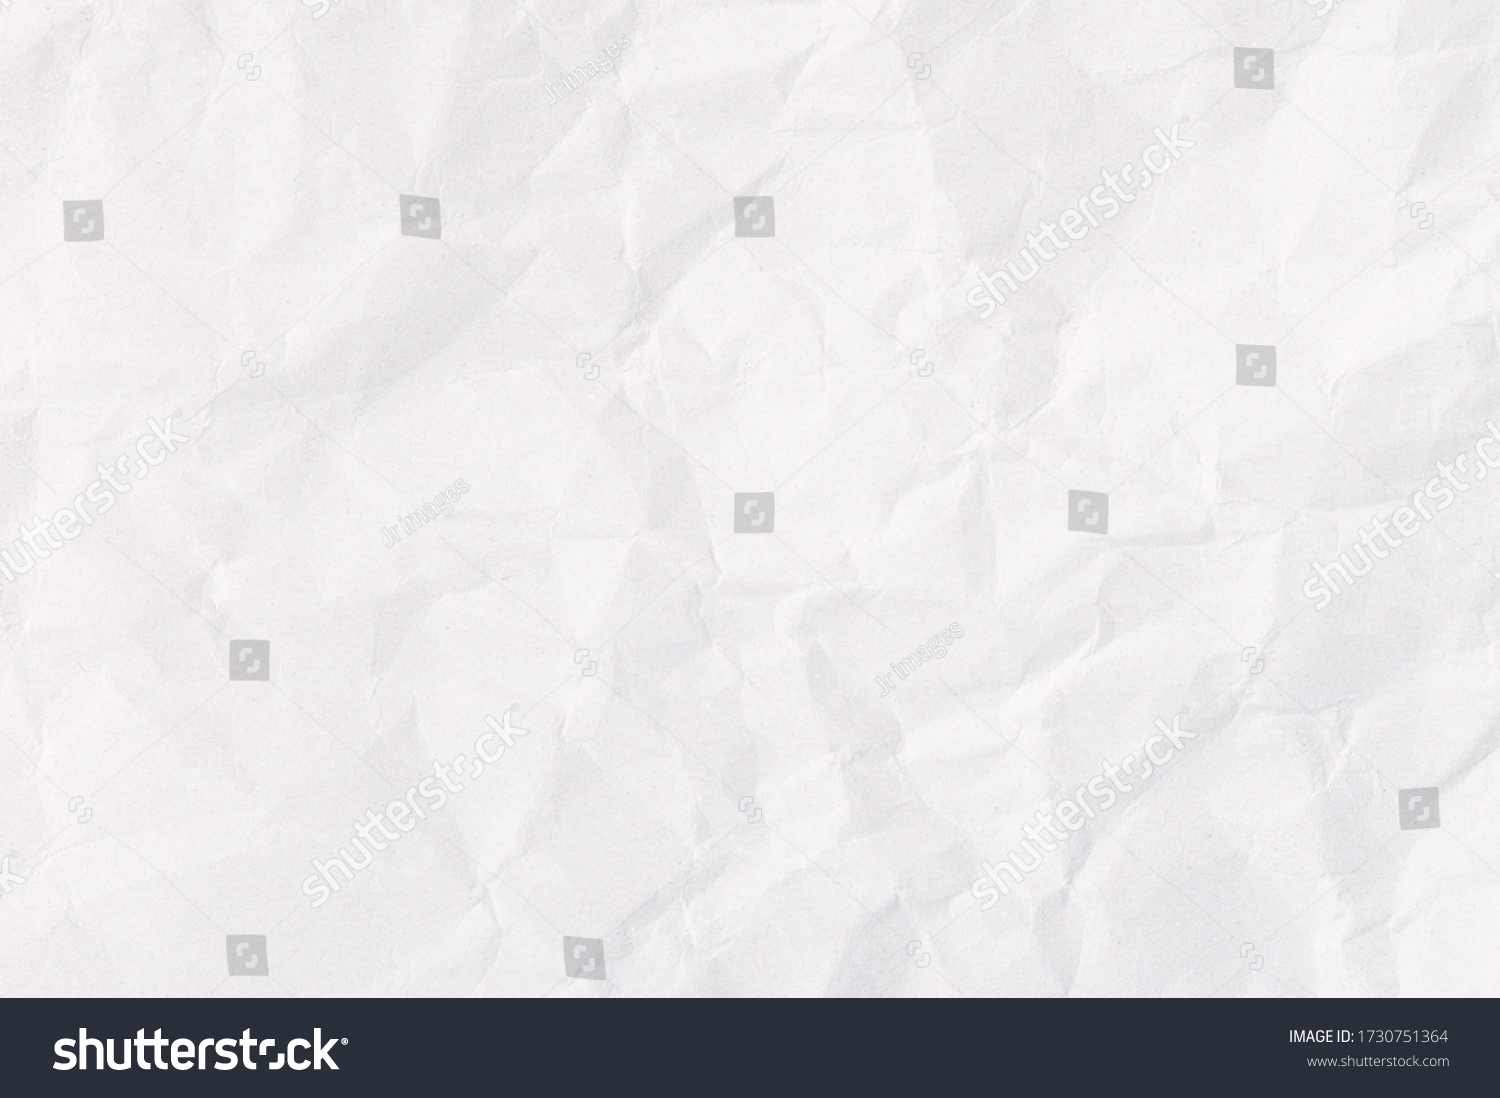 White crumpled paper texture background. #1730751364